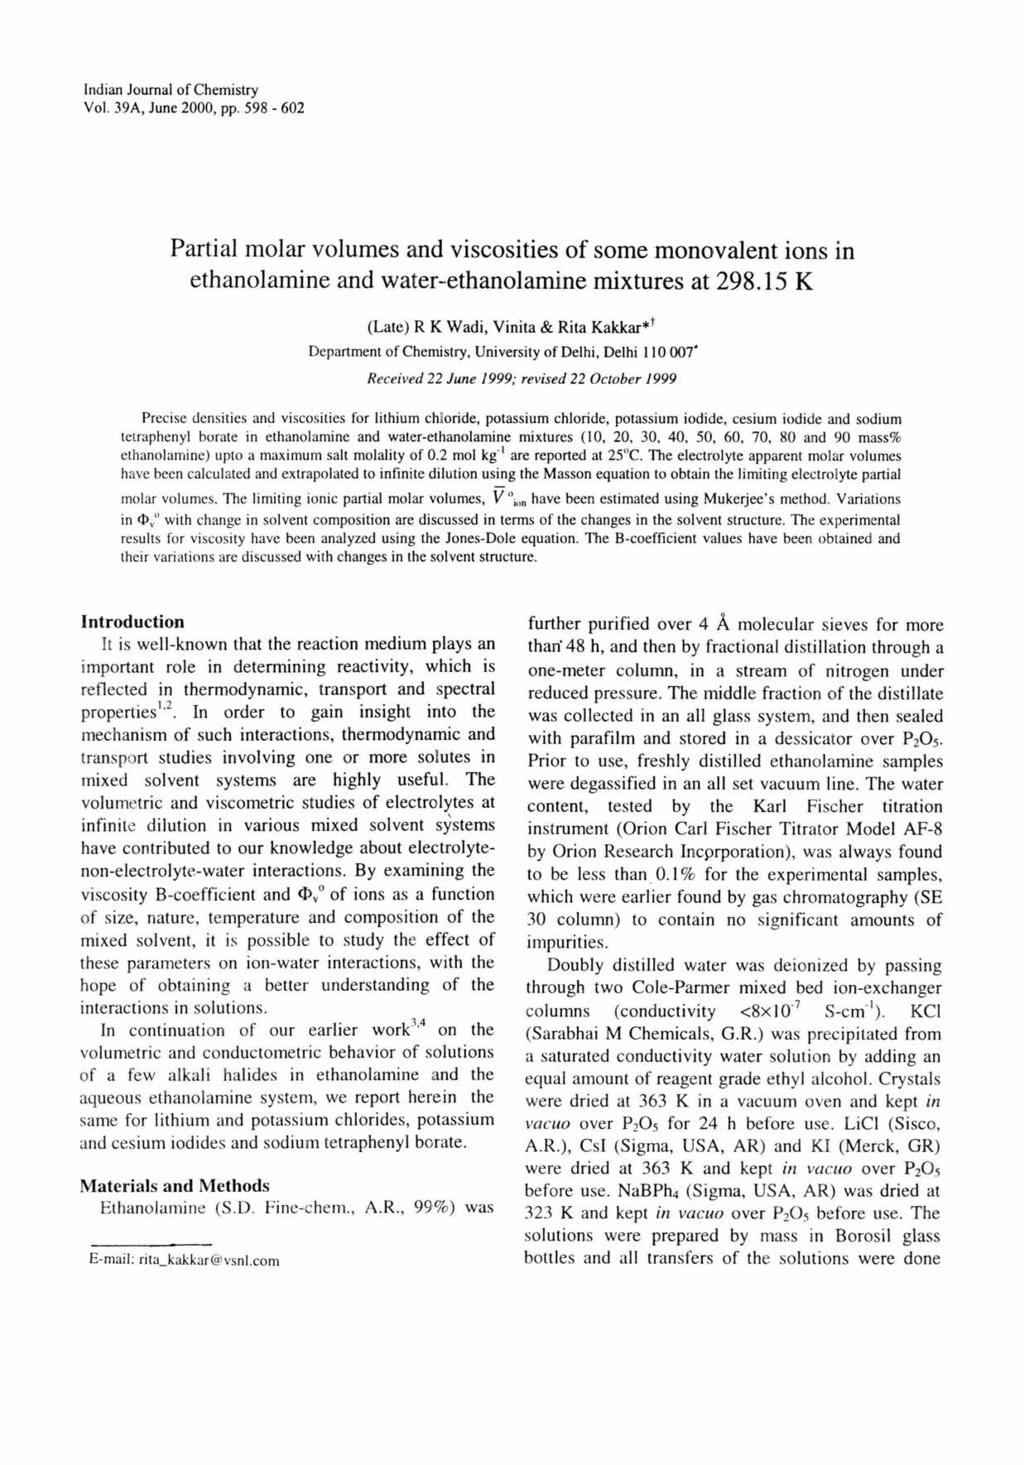 Indian Journal of Chemistry Vol. 39A, June 2000, pp. 598-602 Partial molar volumes and viscosities of some monovalent ions in ethanolamine and water--ethanolamine mixtures at 298.